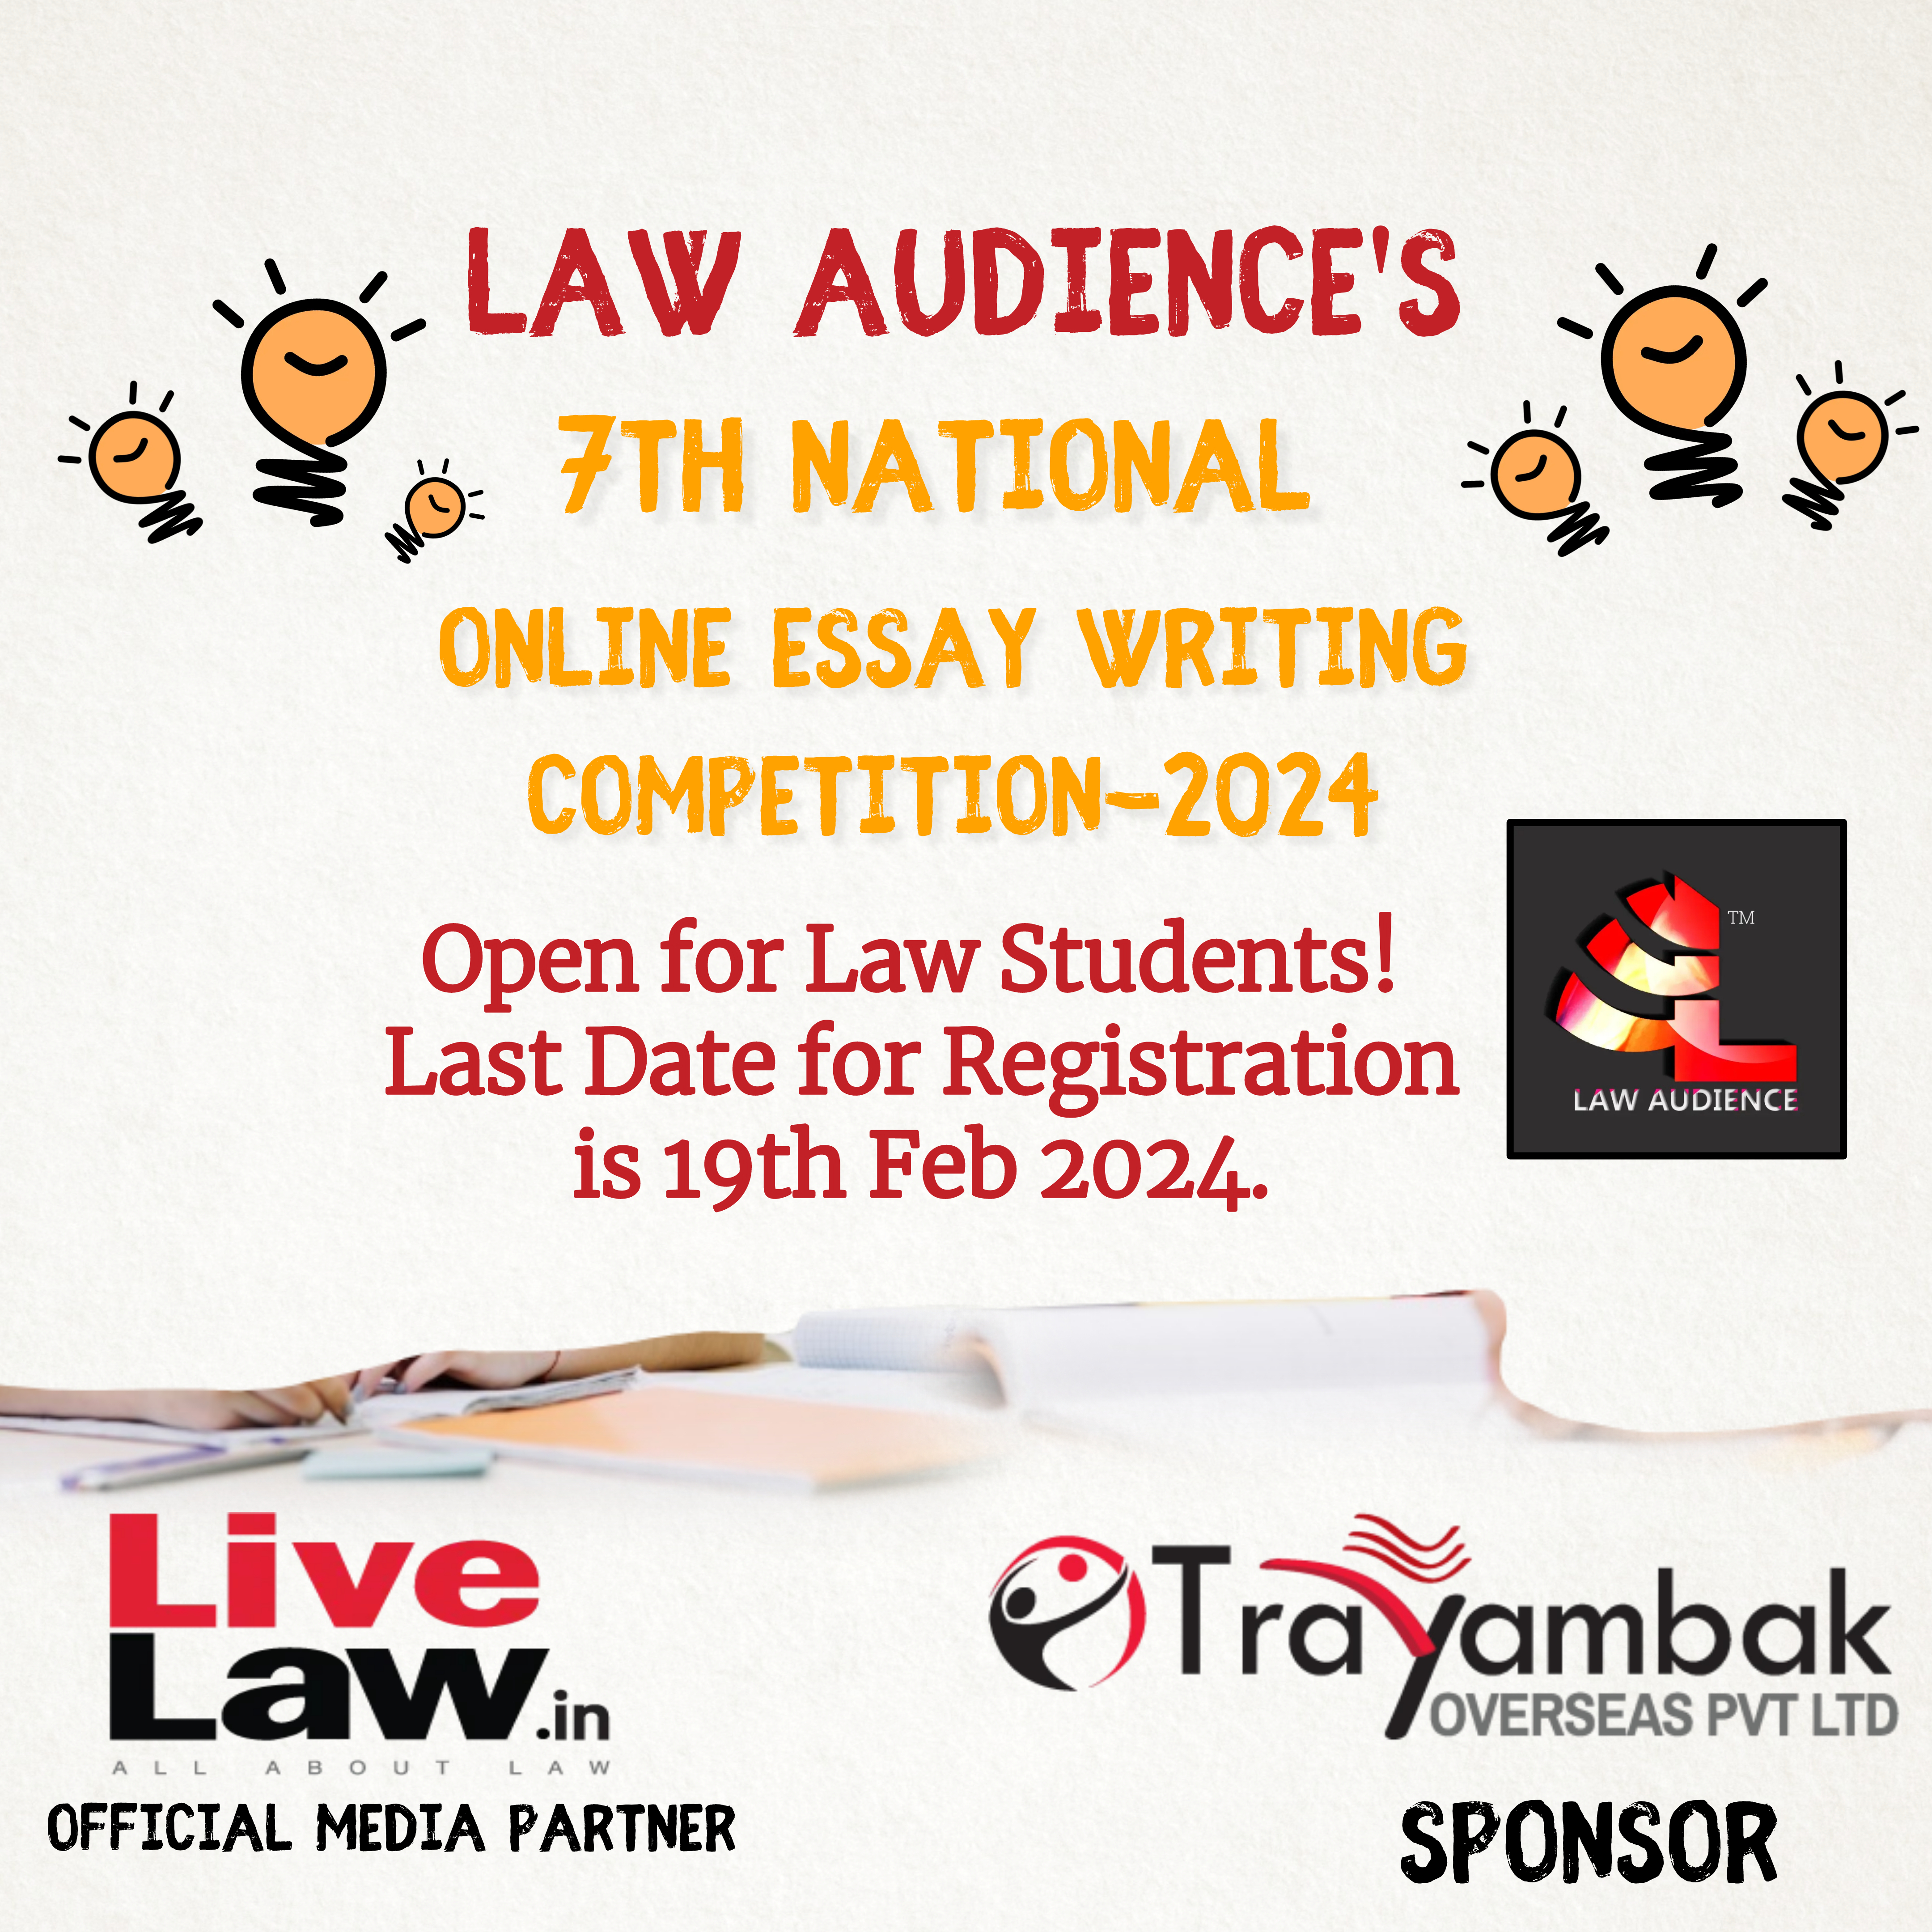 You are currently viewing Law Audience’s 7th National Online Essay Writing Competition 2024